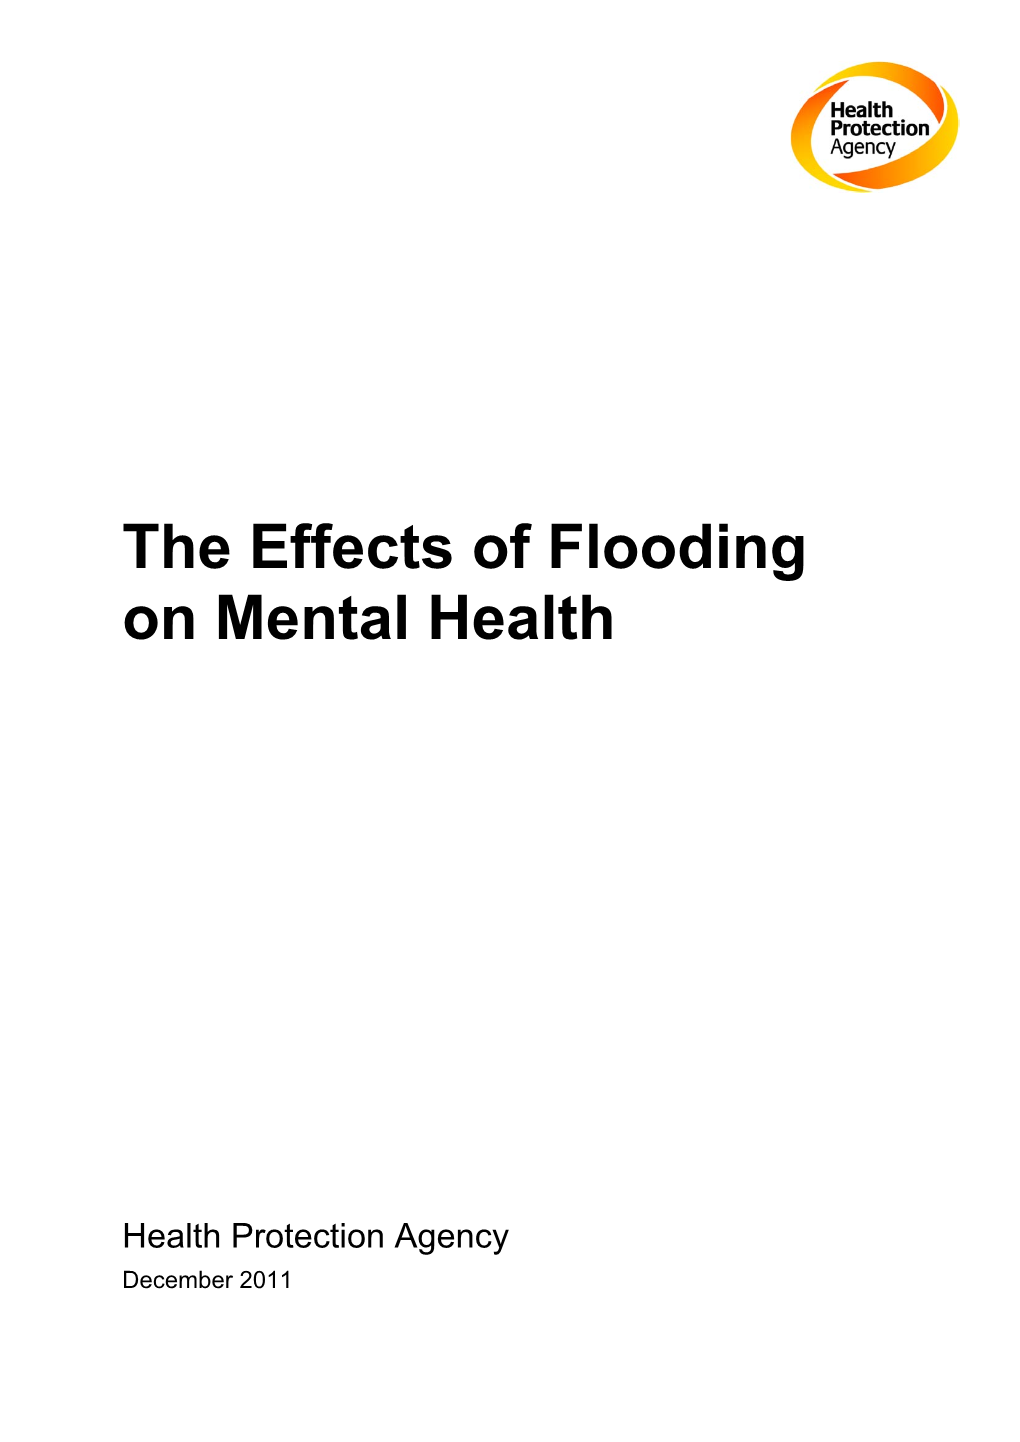 Effects of Flooding on Mental Health